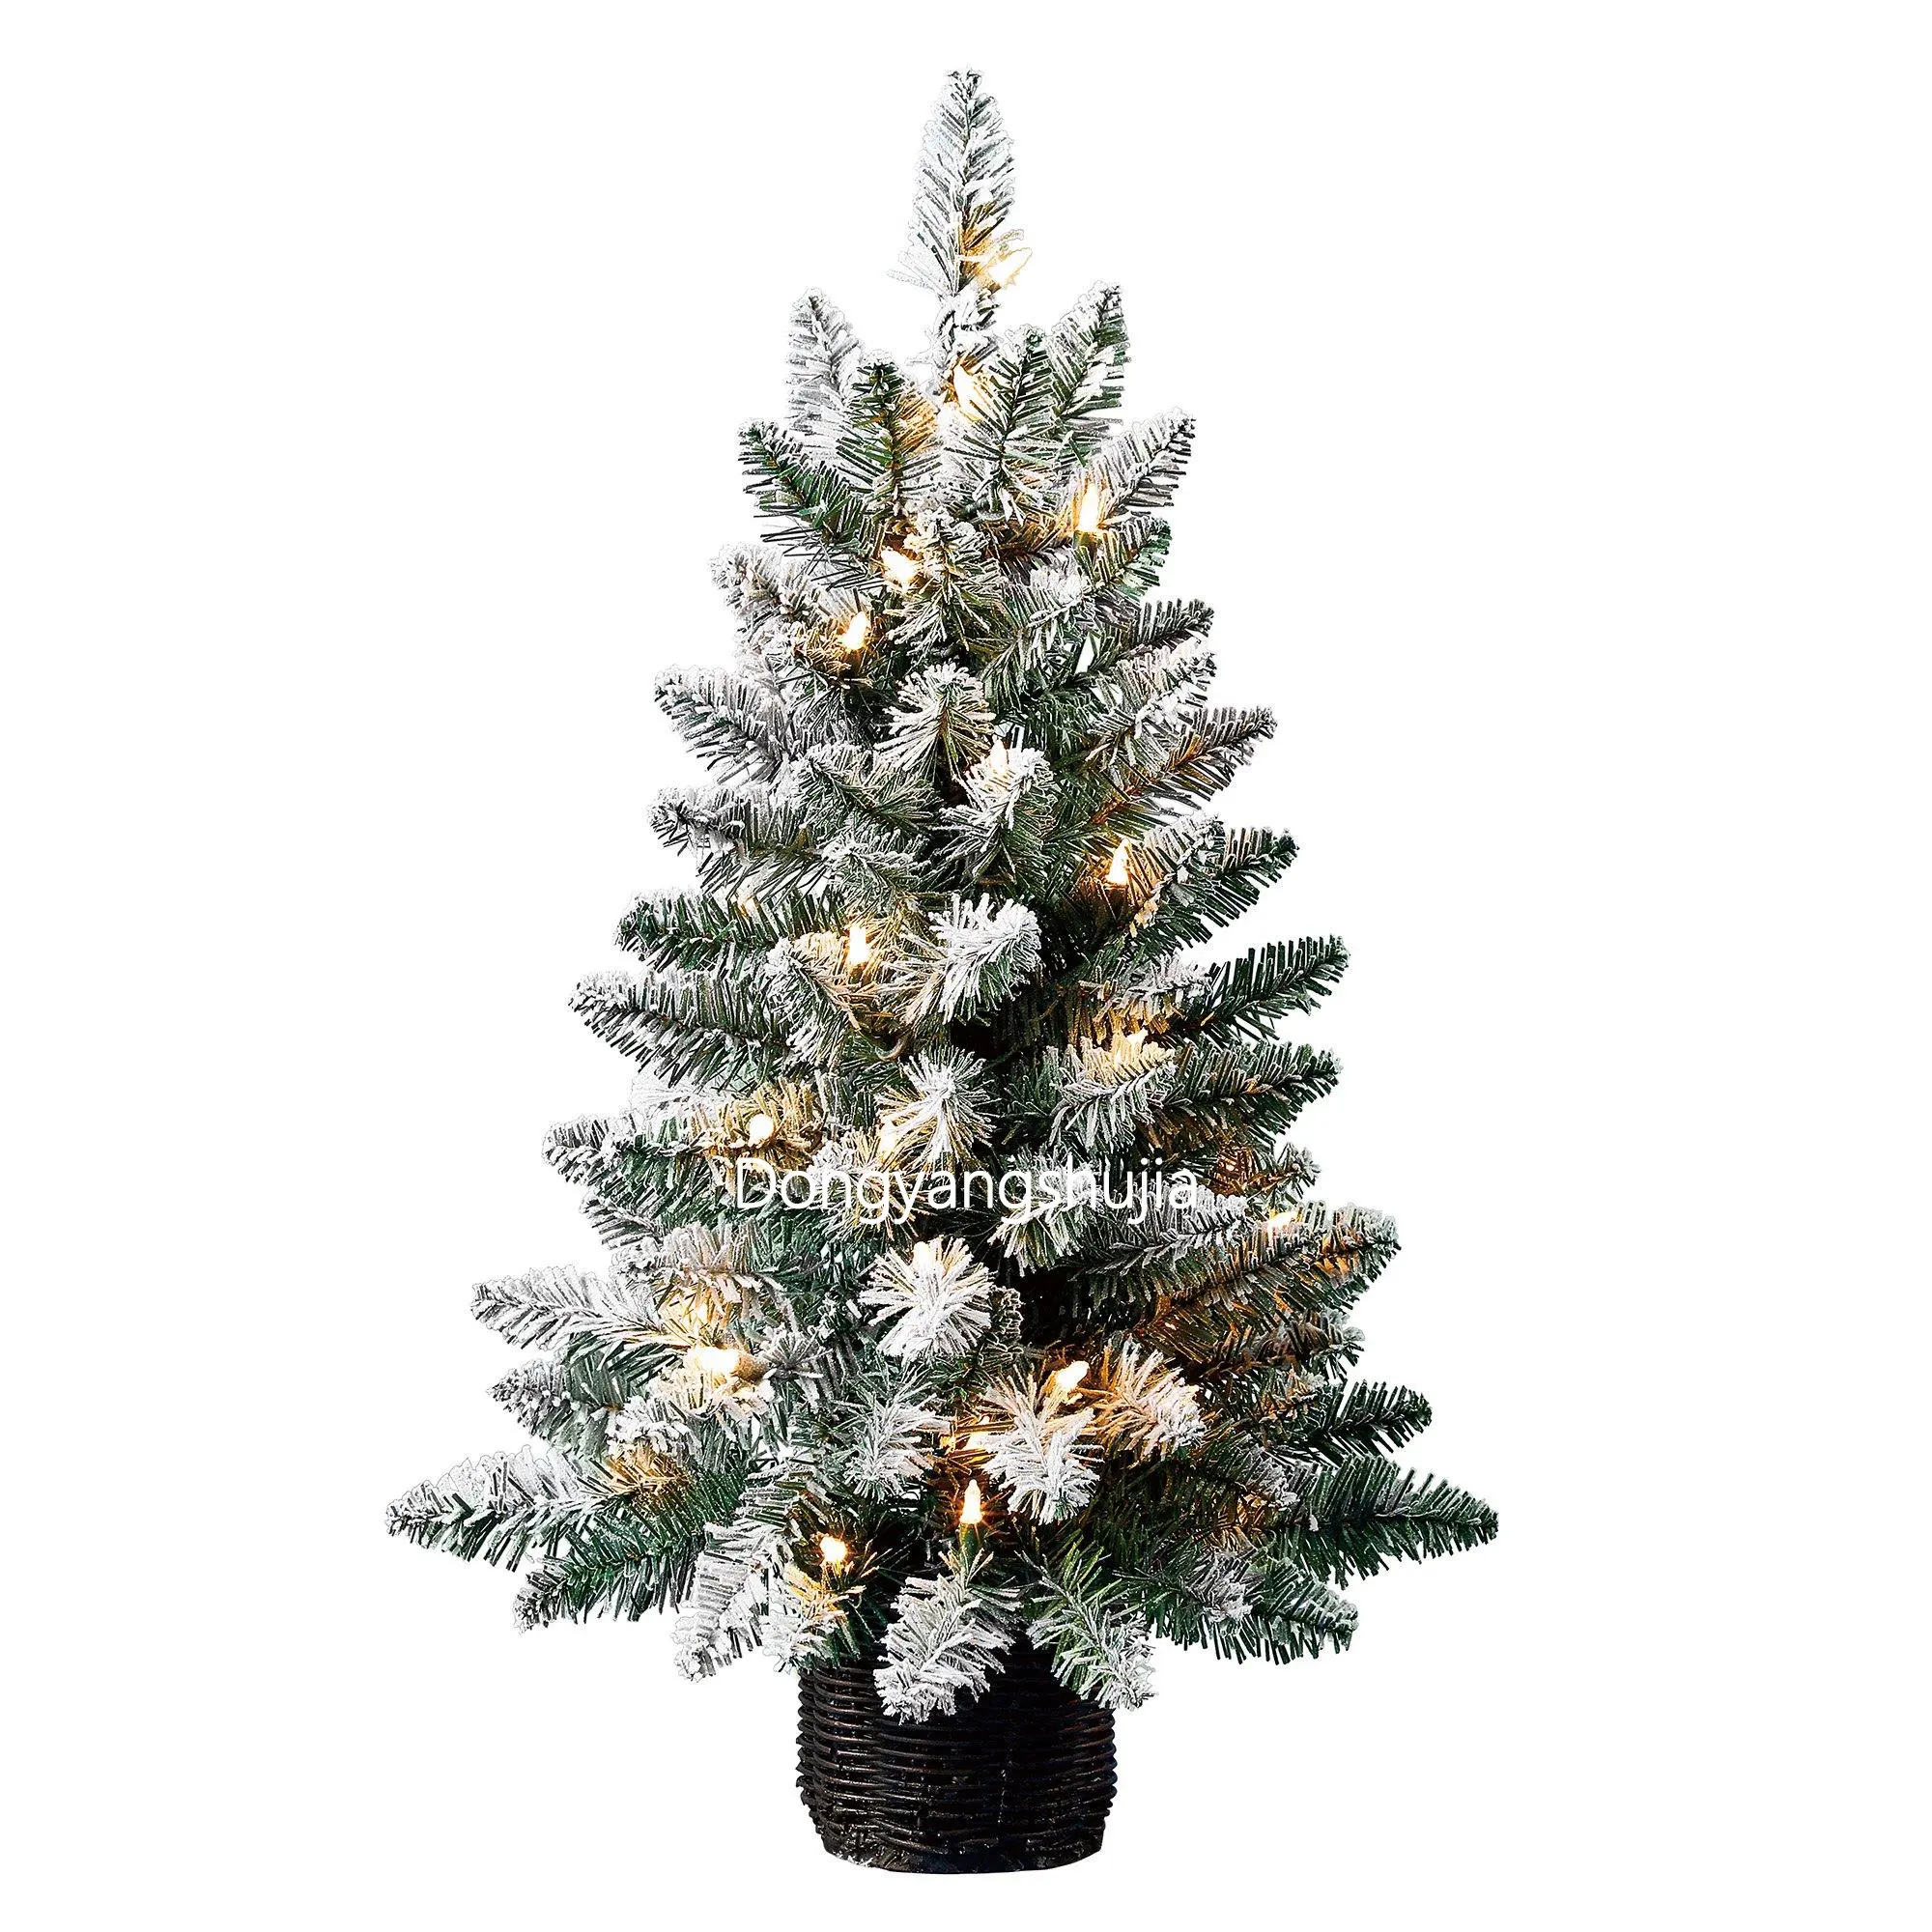 2FT advanced decoration PVC artificial pre-lighting small LED flocking mini Christmas tree indoor and outdoor decoration